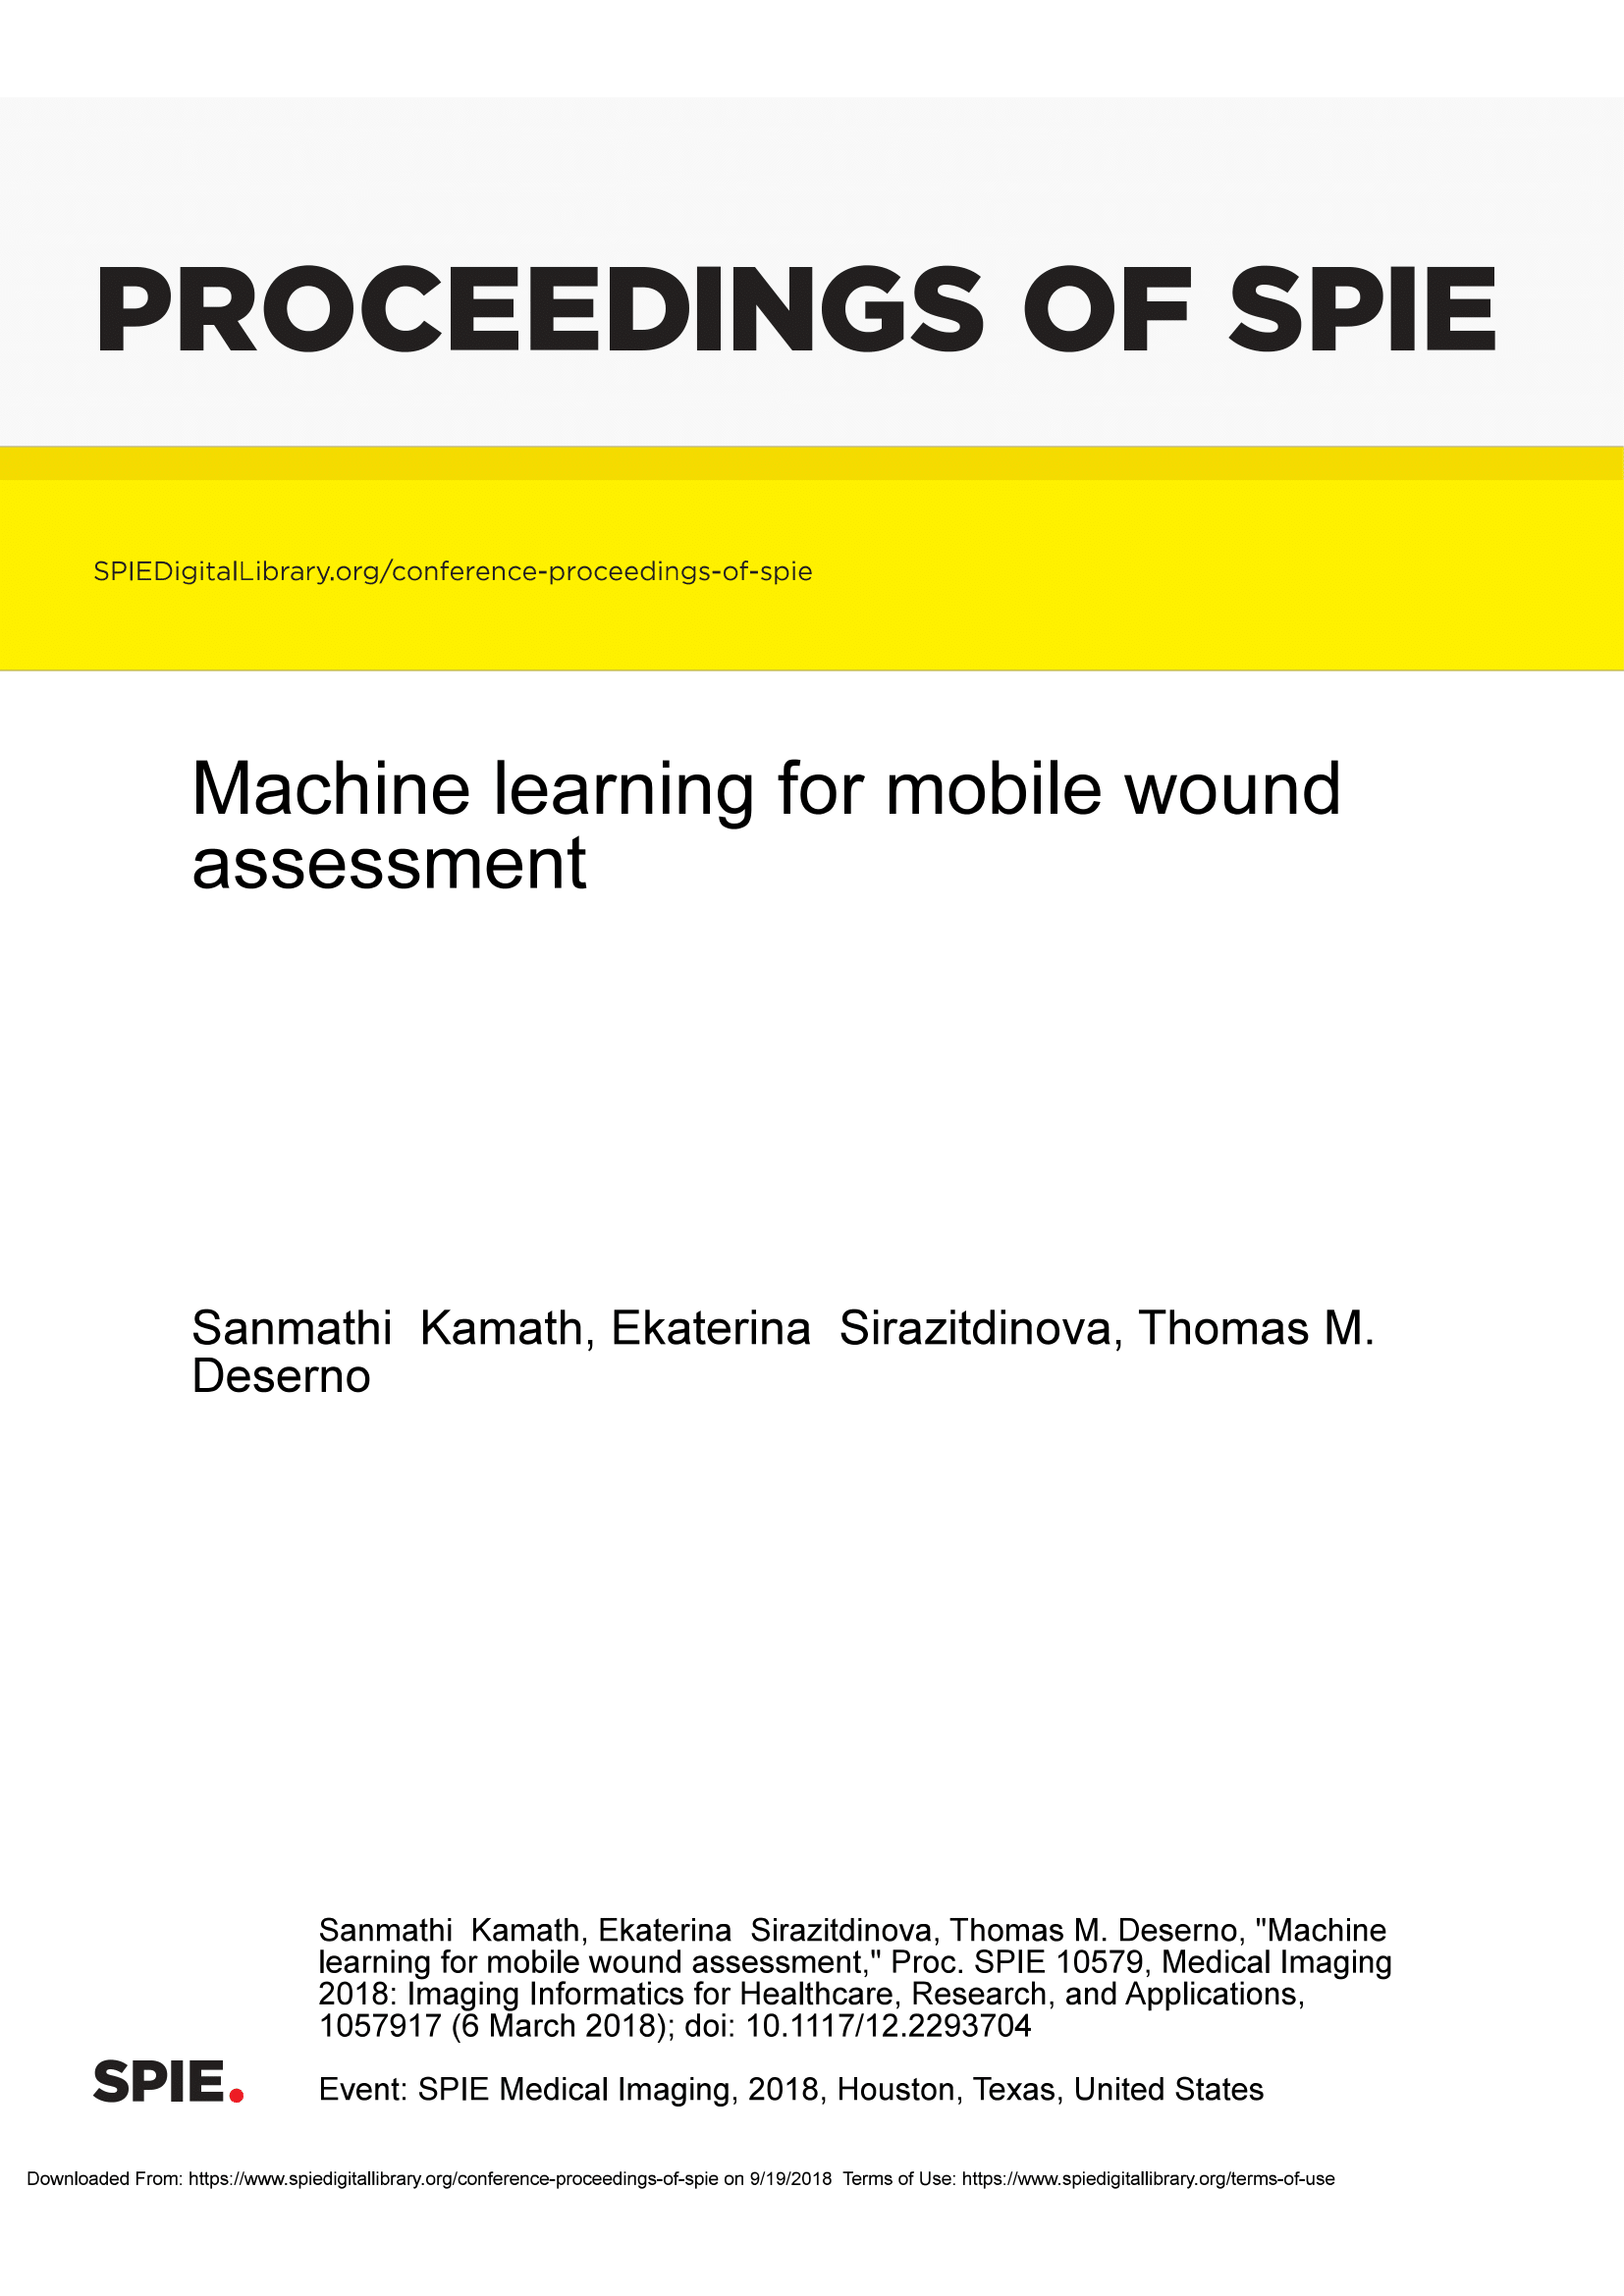 Machine learning for mobile wound assessment